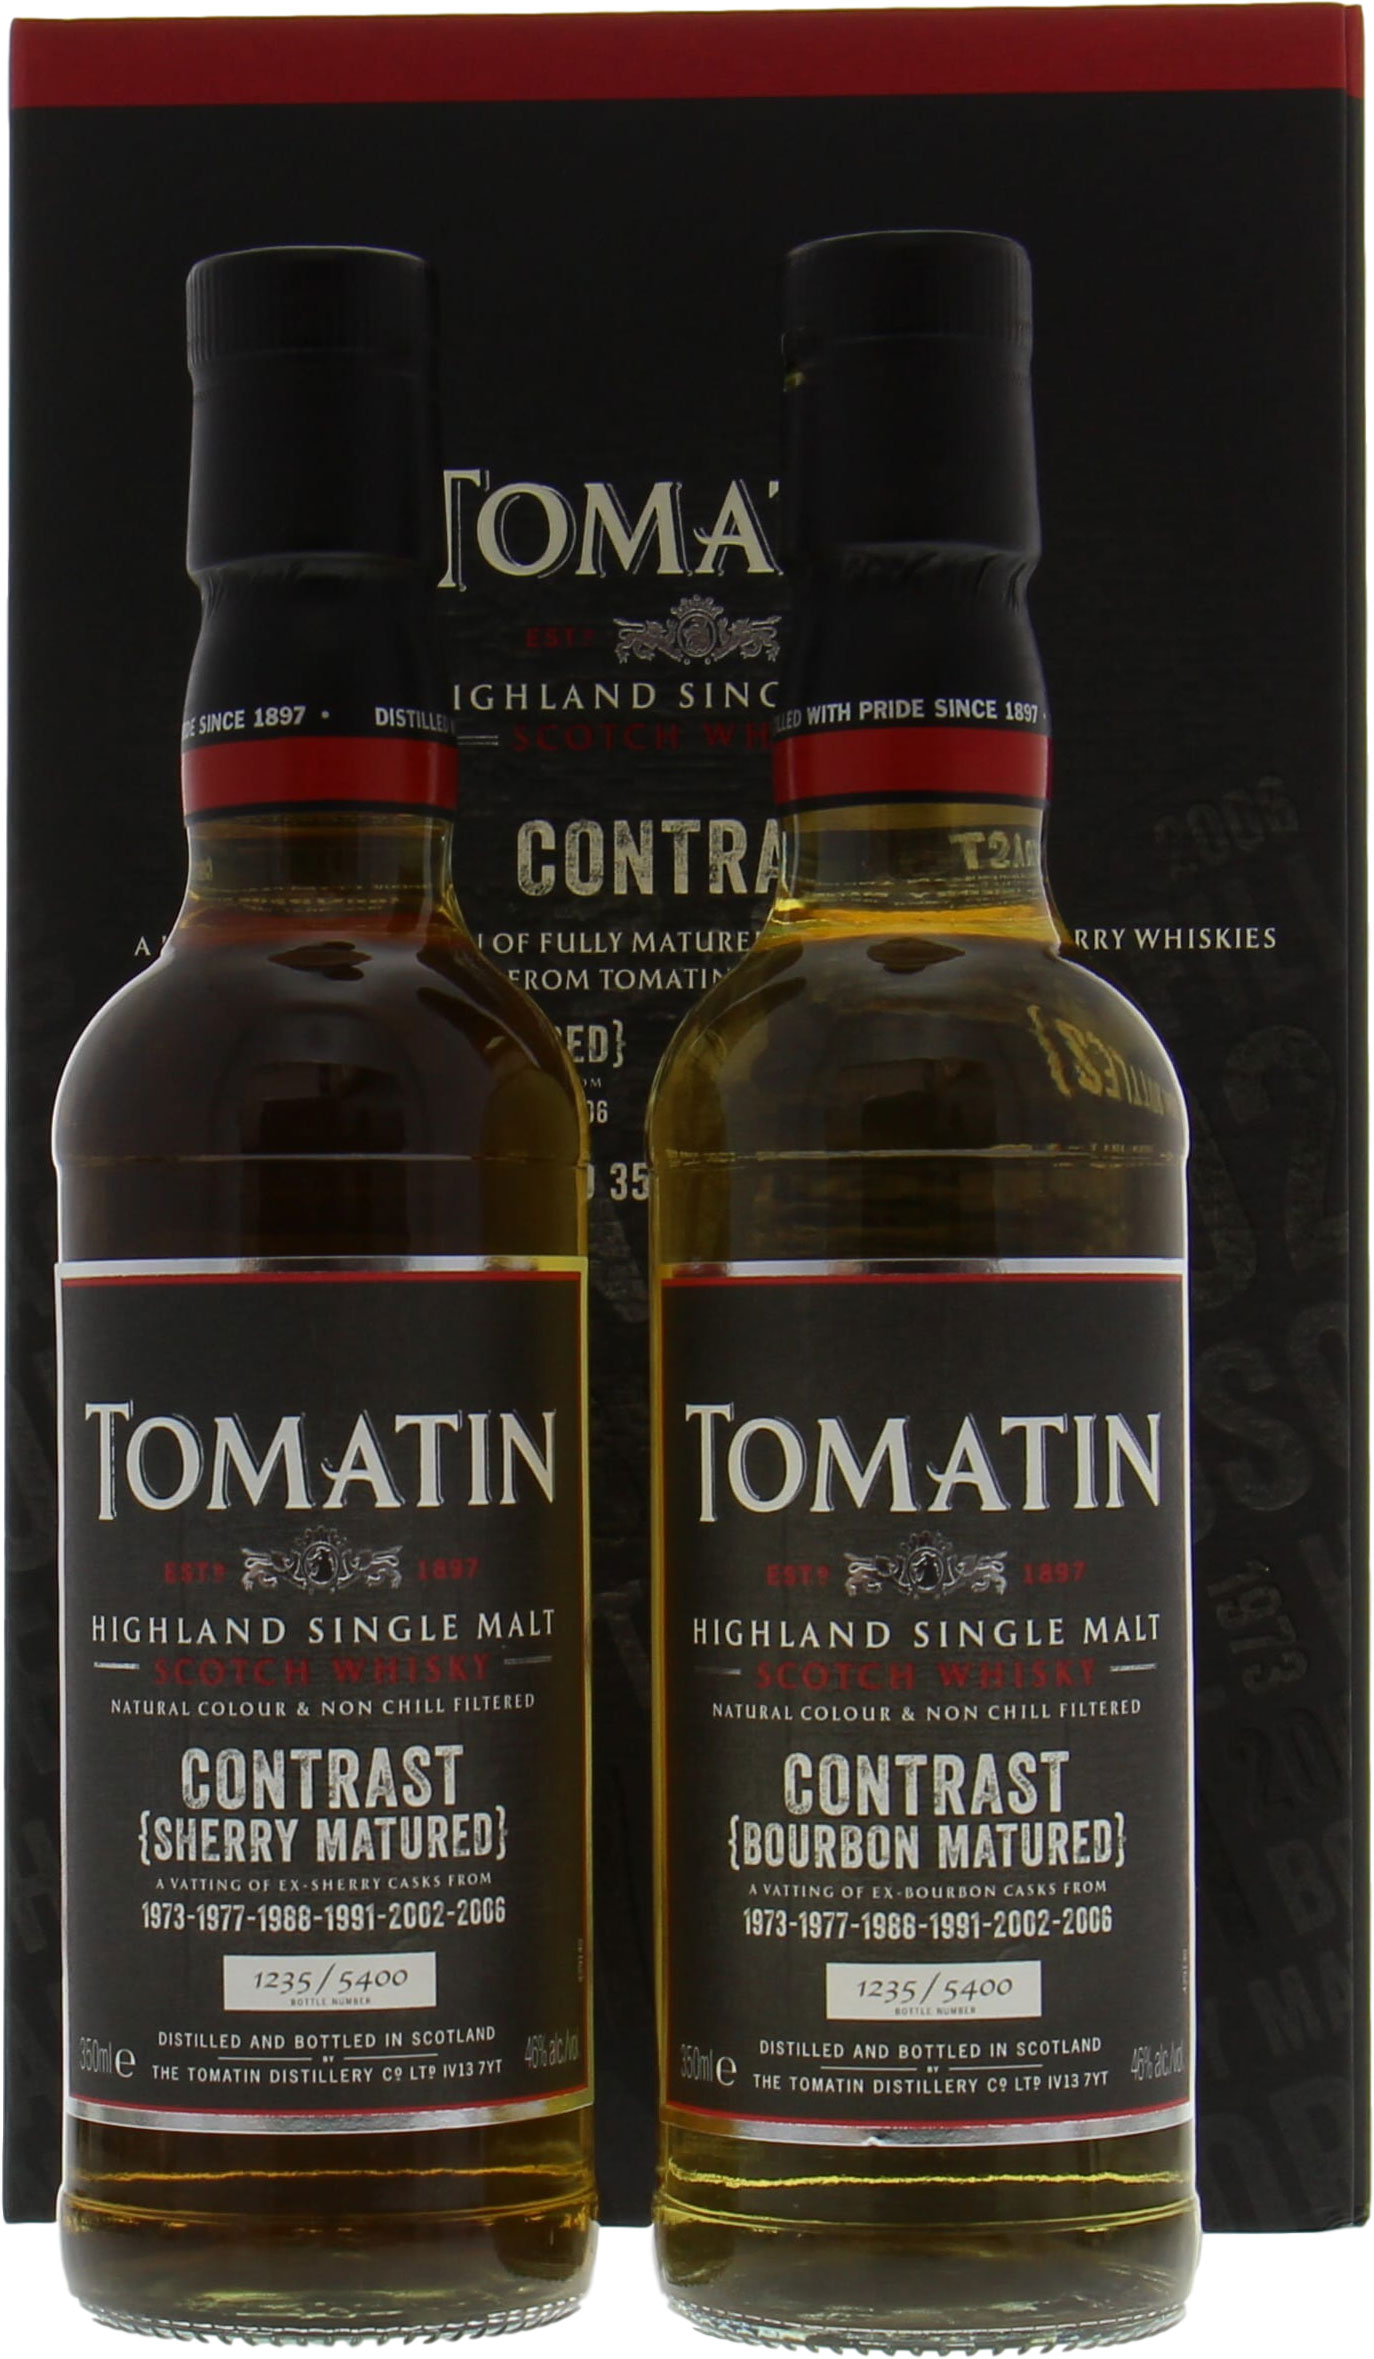 Tomatin - Contrast Bourbon & Sherry Matured Limited release 46% NV In Original Container